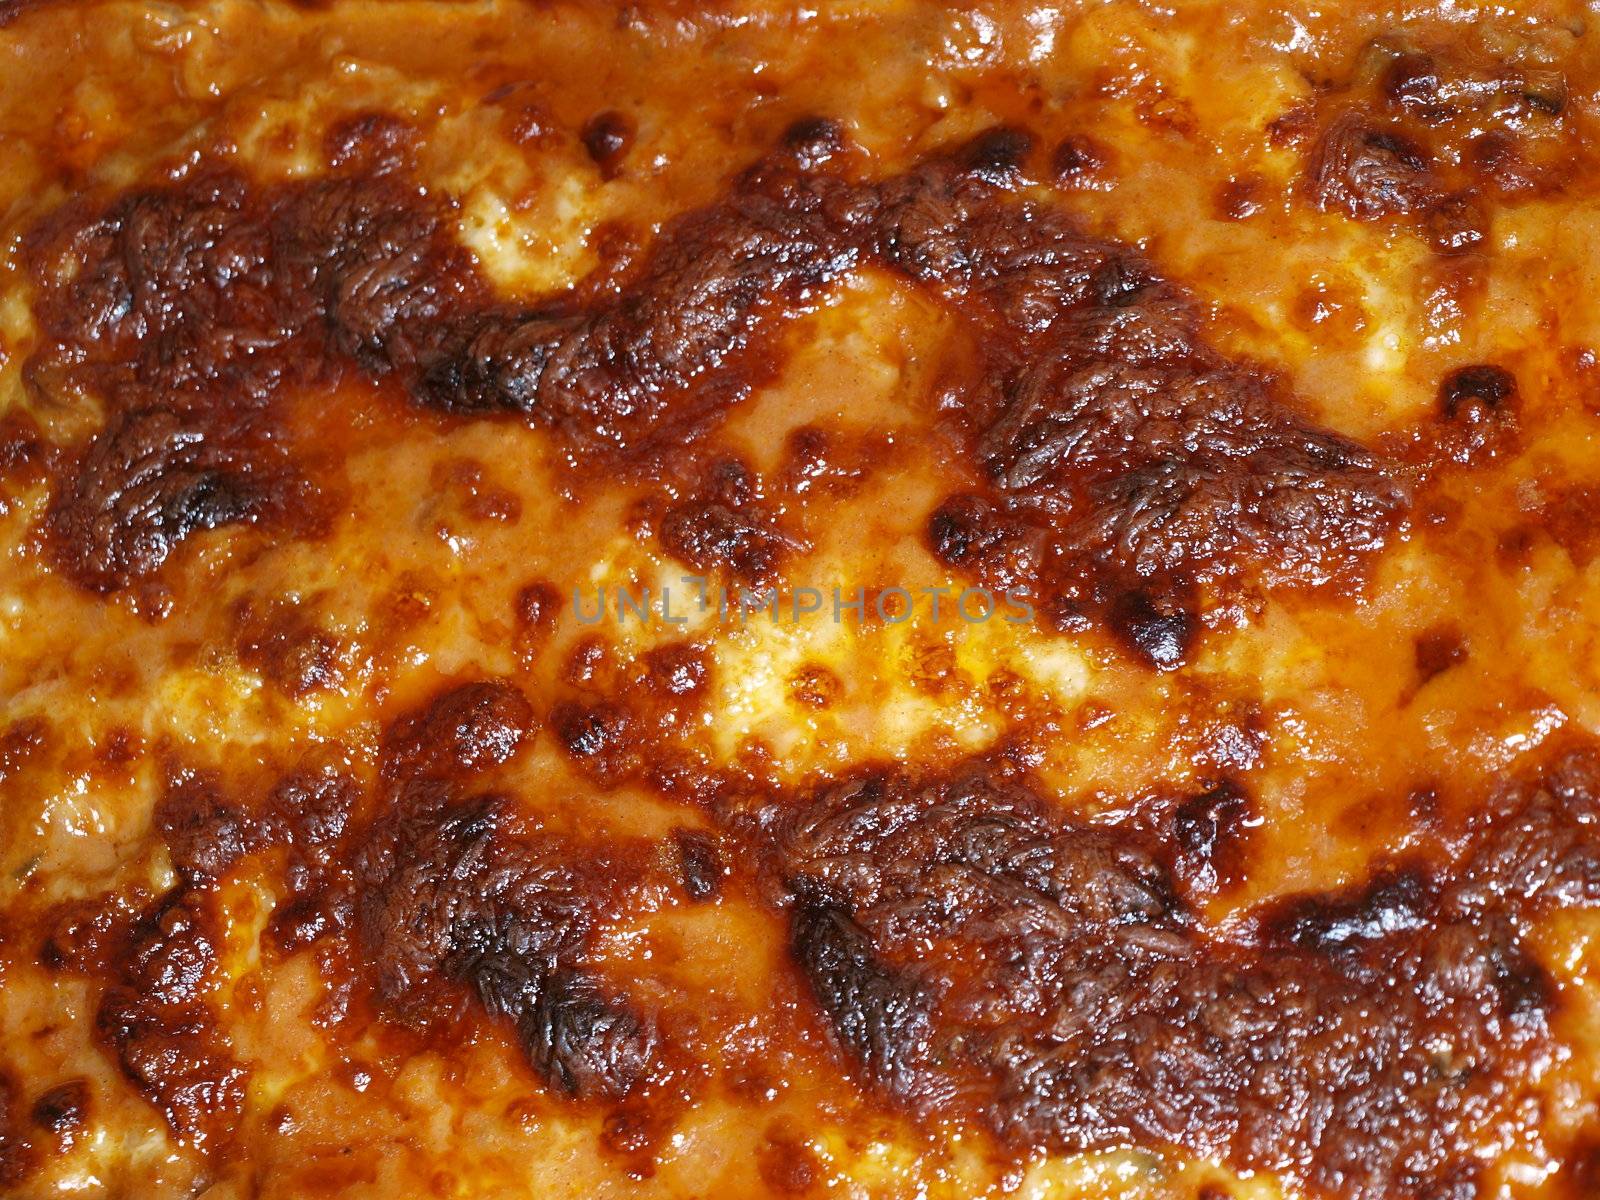 Closeup of melted cheese, brown and crusty by Arvebettum